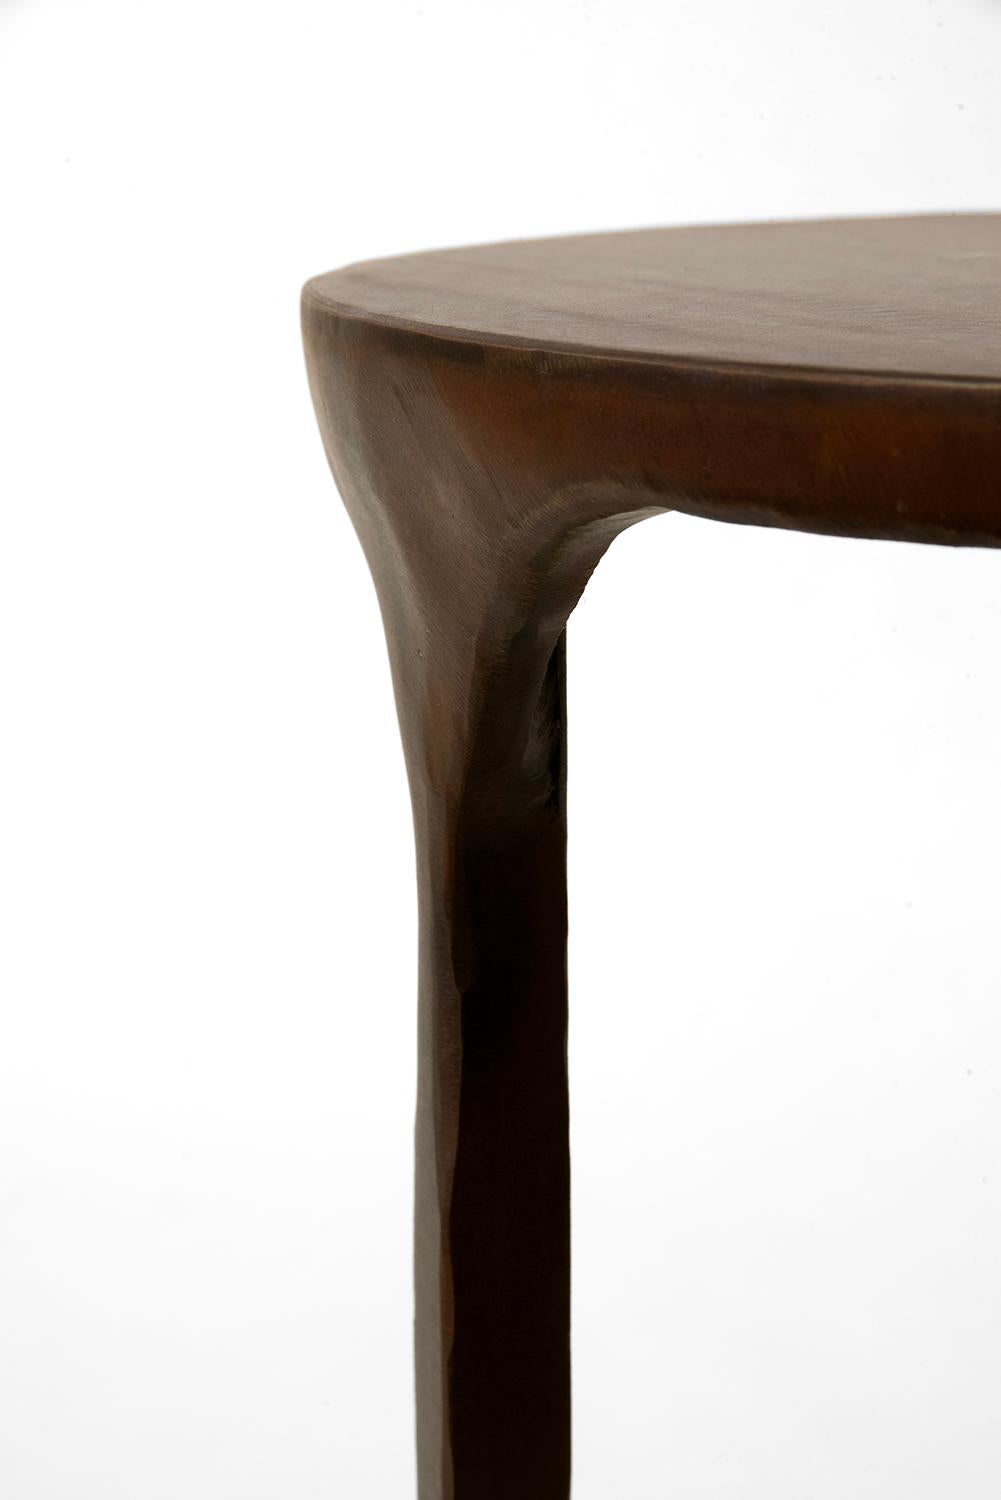 Hand-Crafted Side Table Classic Modern Bronze Steel Minimalist Hand-Shaped Contemporary For Sale